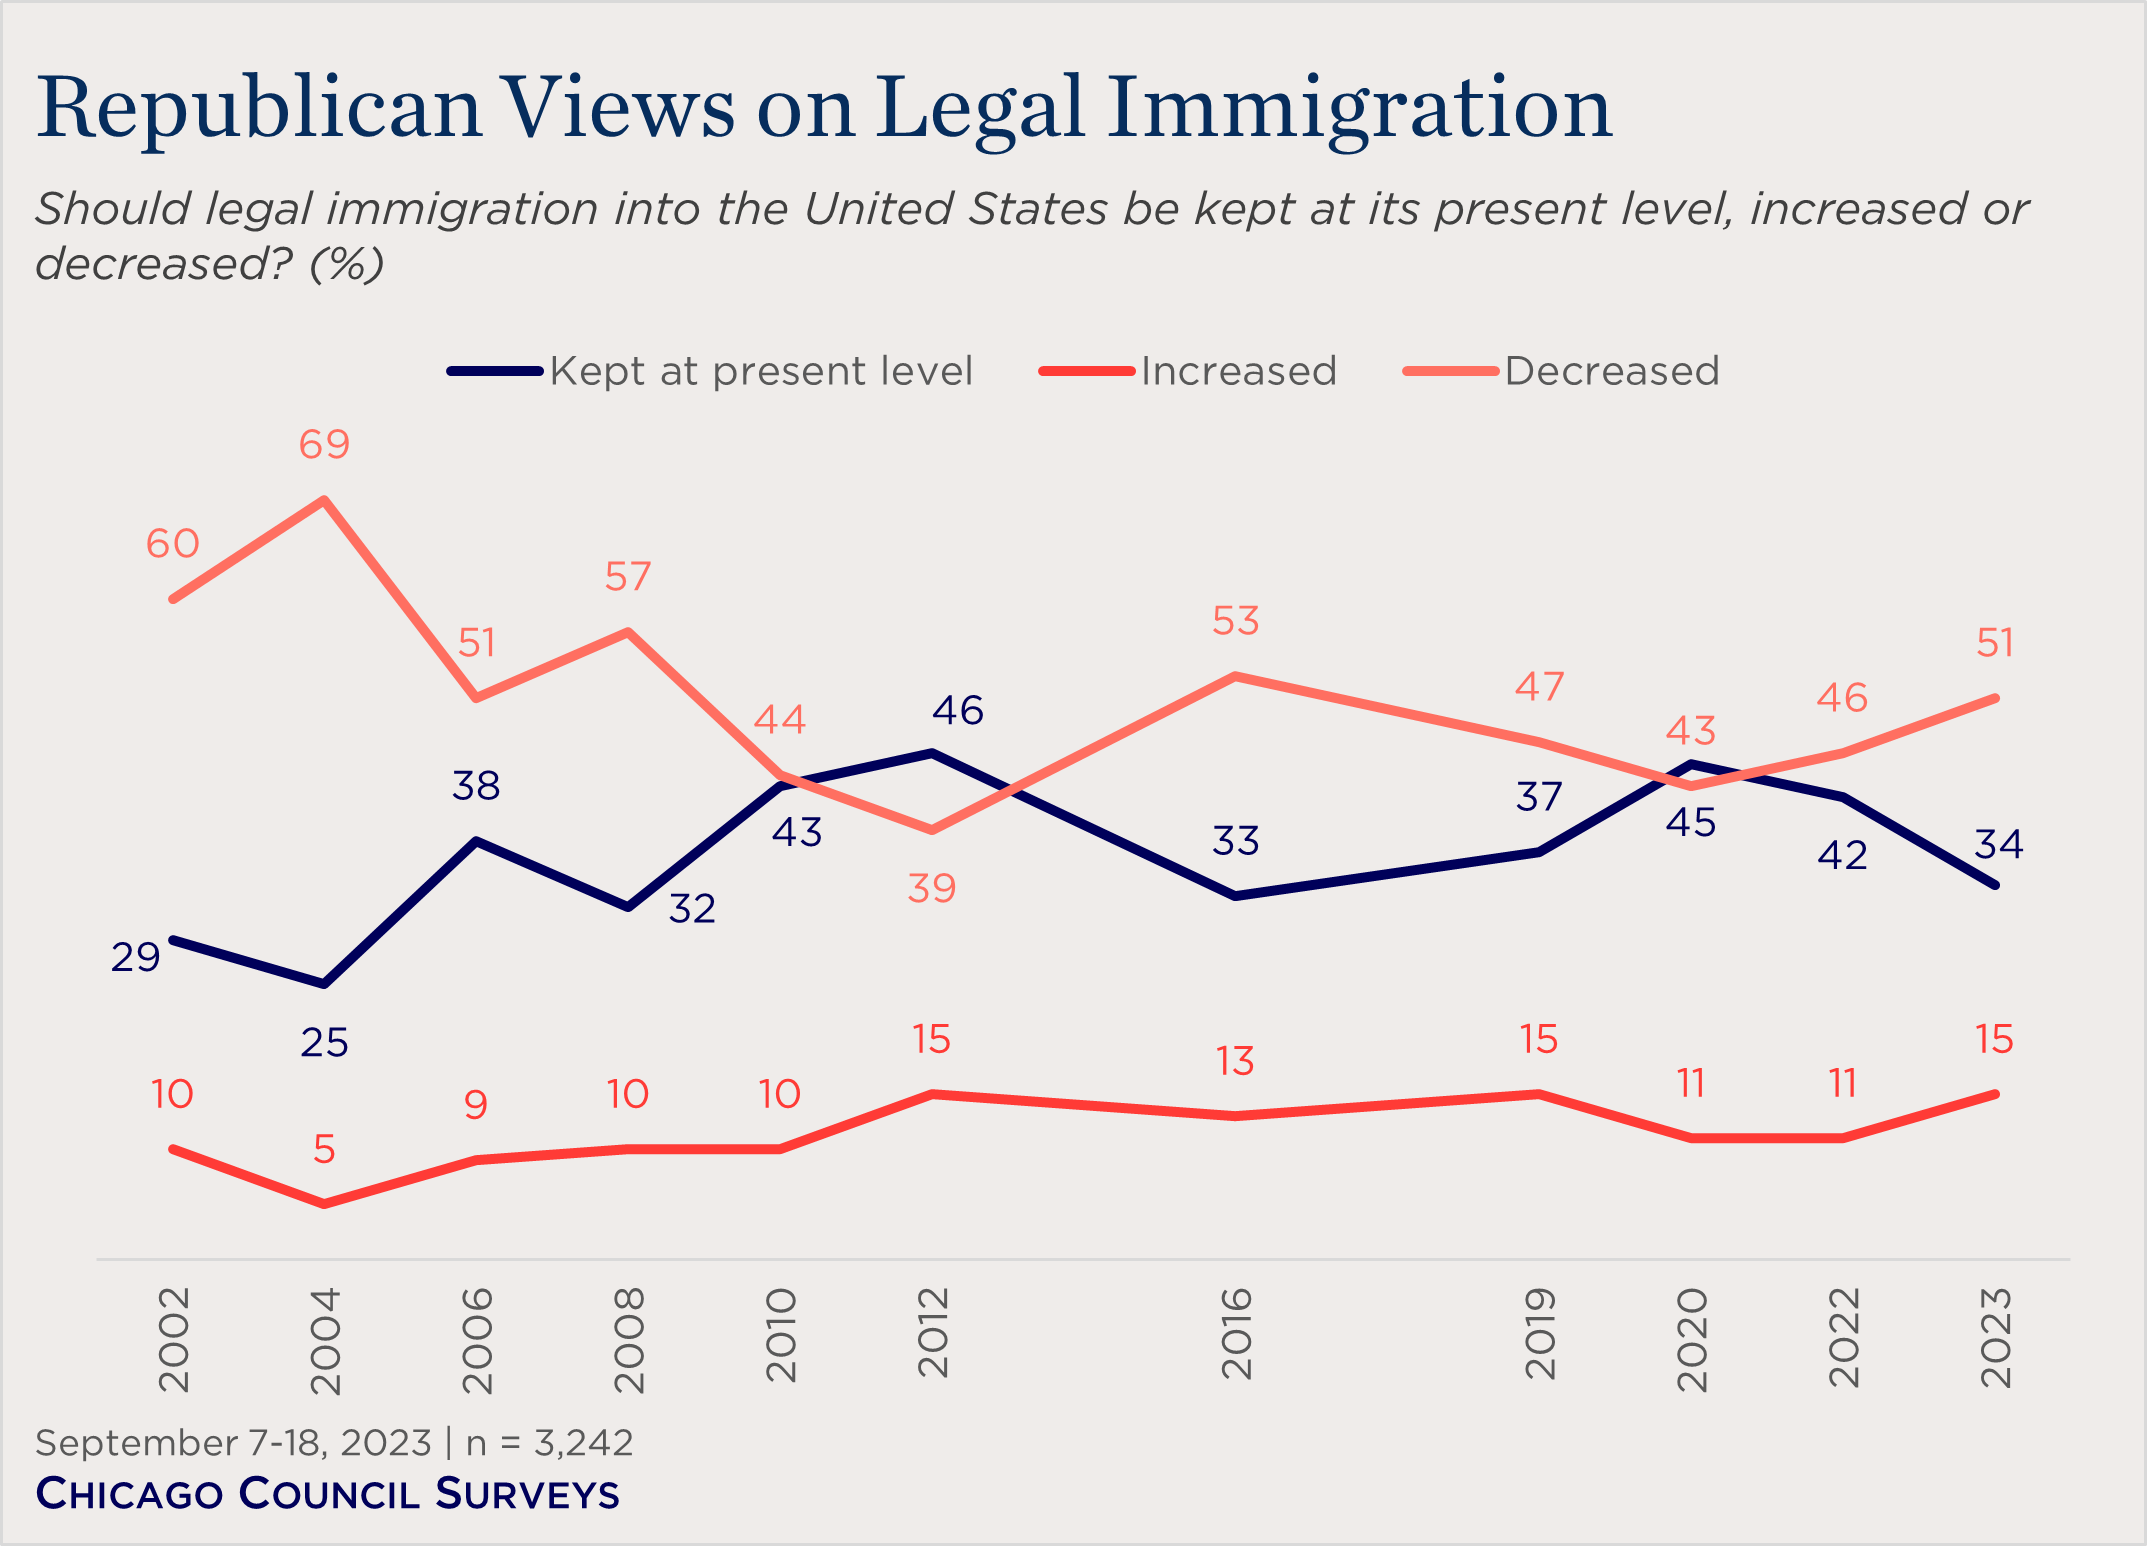 "line chart showing Republican views on legal immigration"